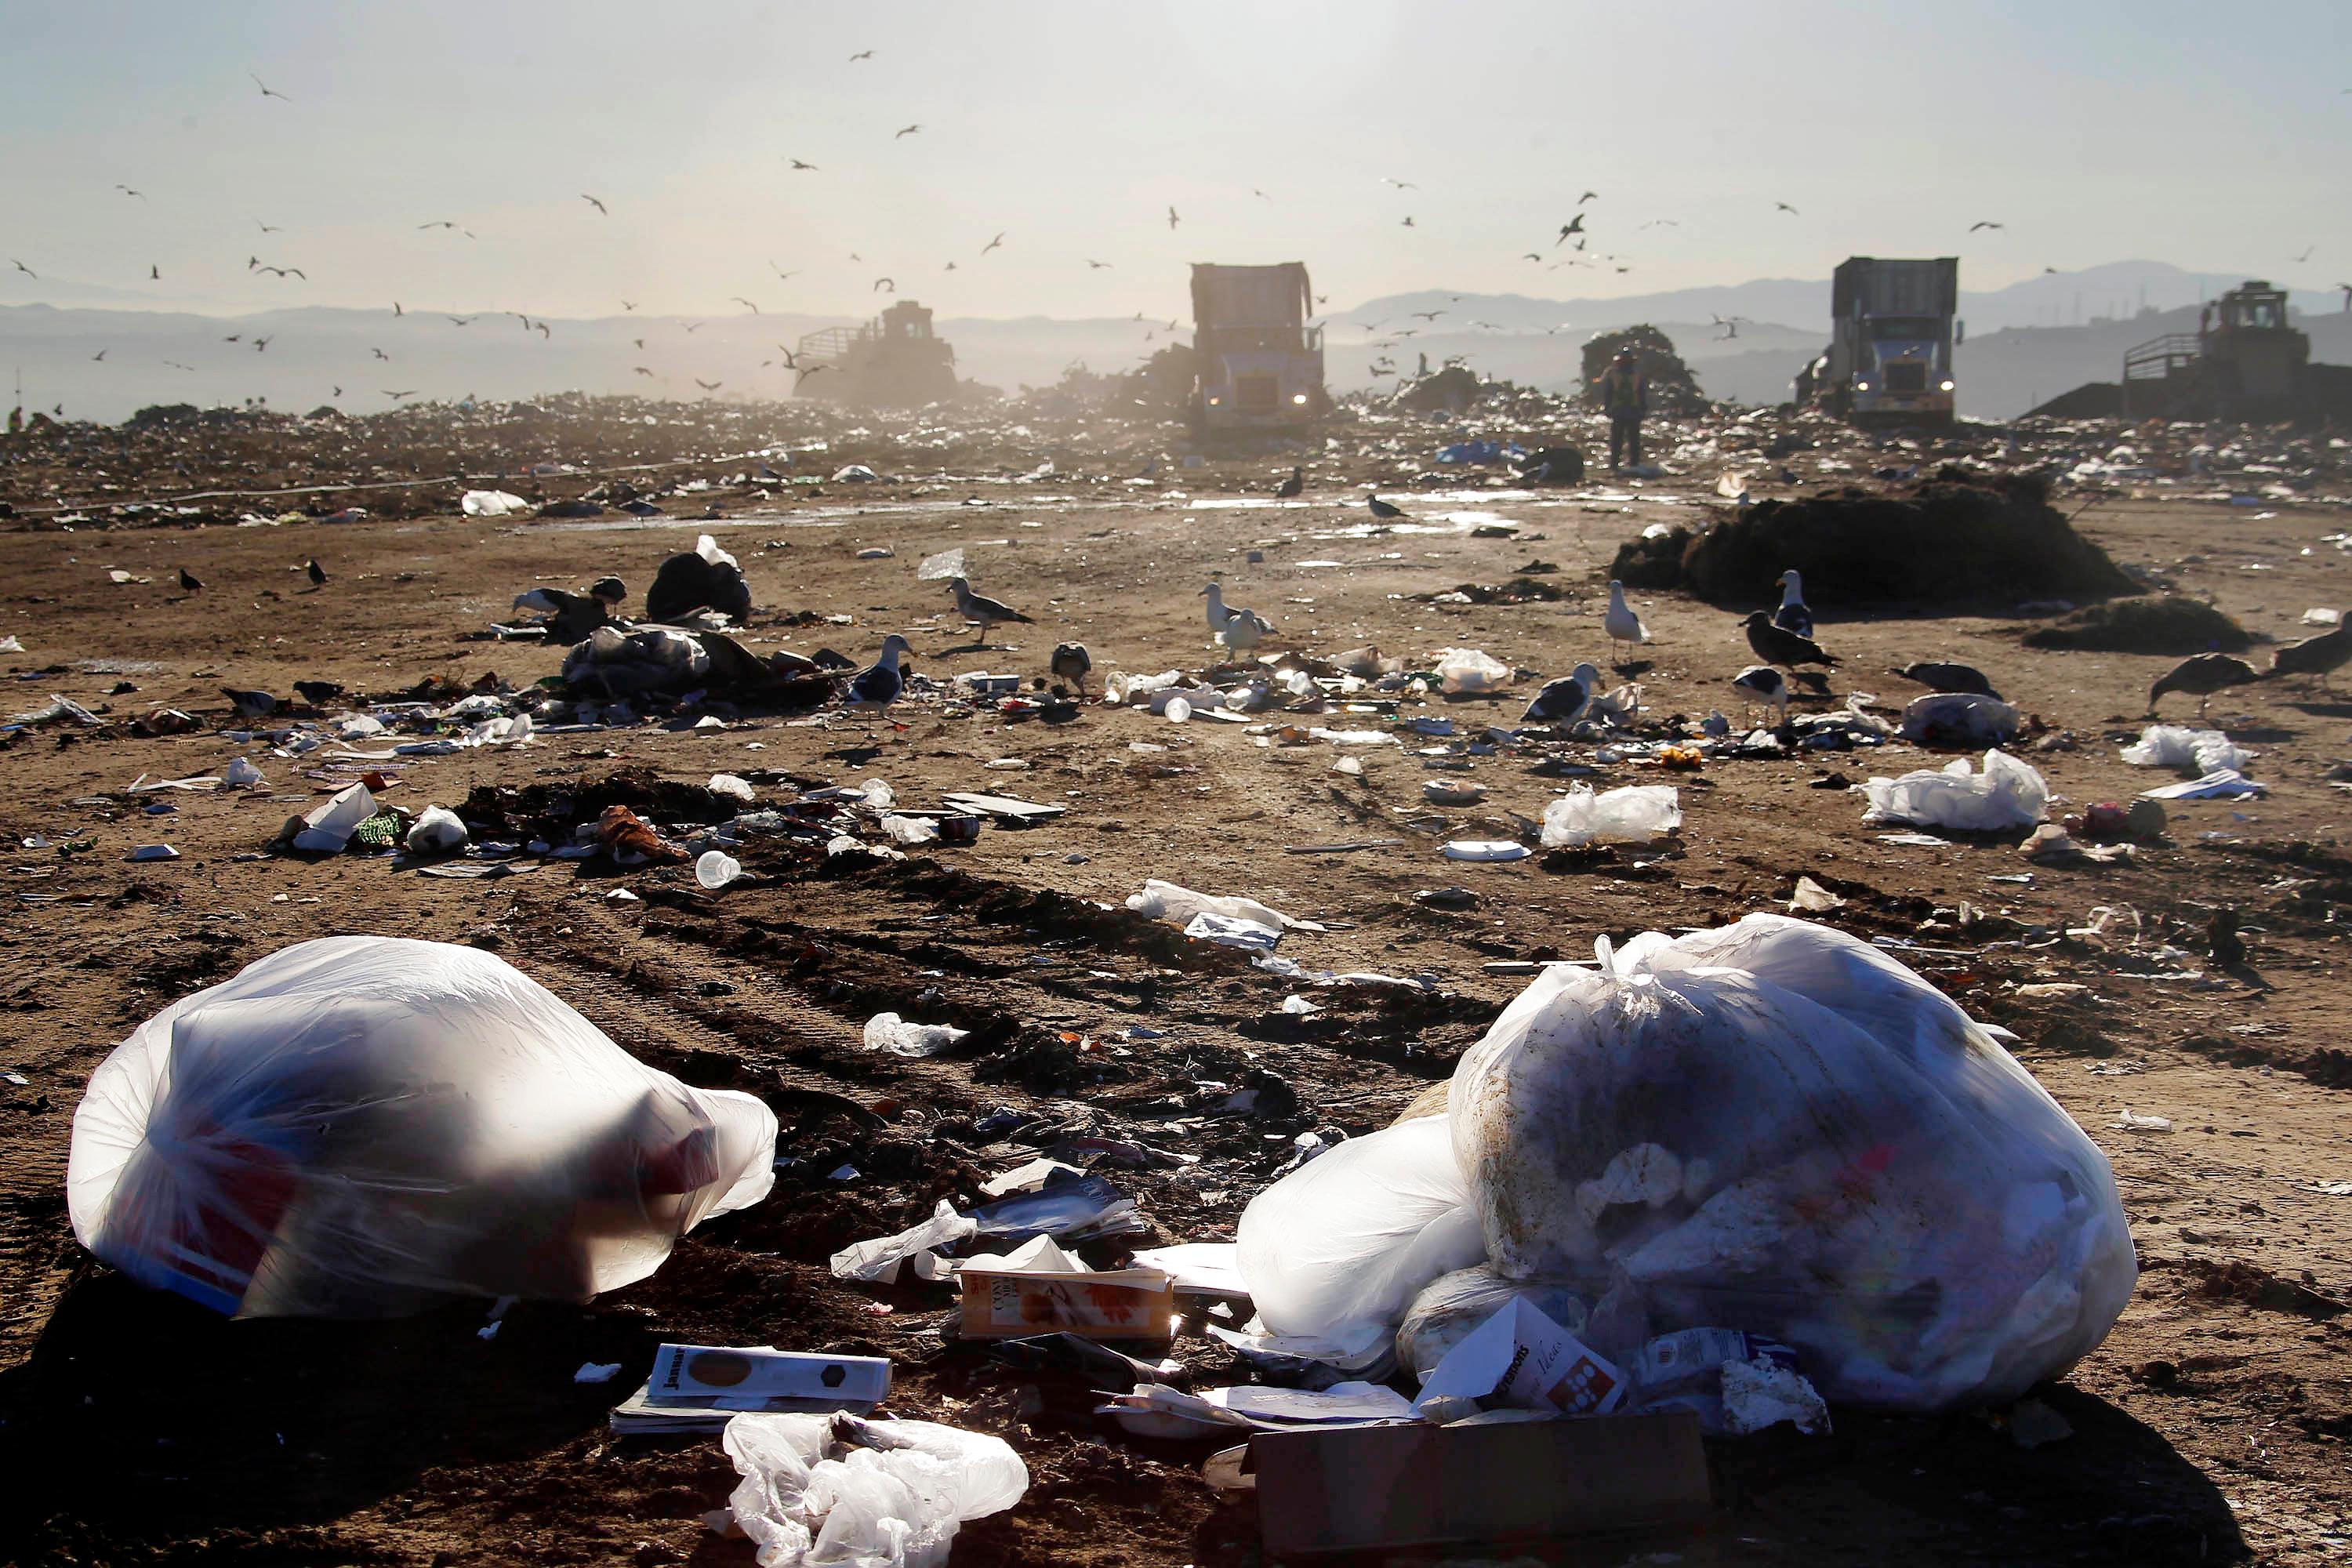 California Landfill Operators to Hold Community Meetings on Odor Relief Program